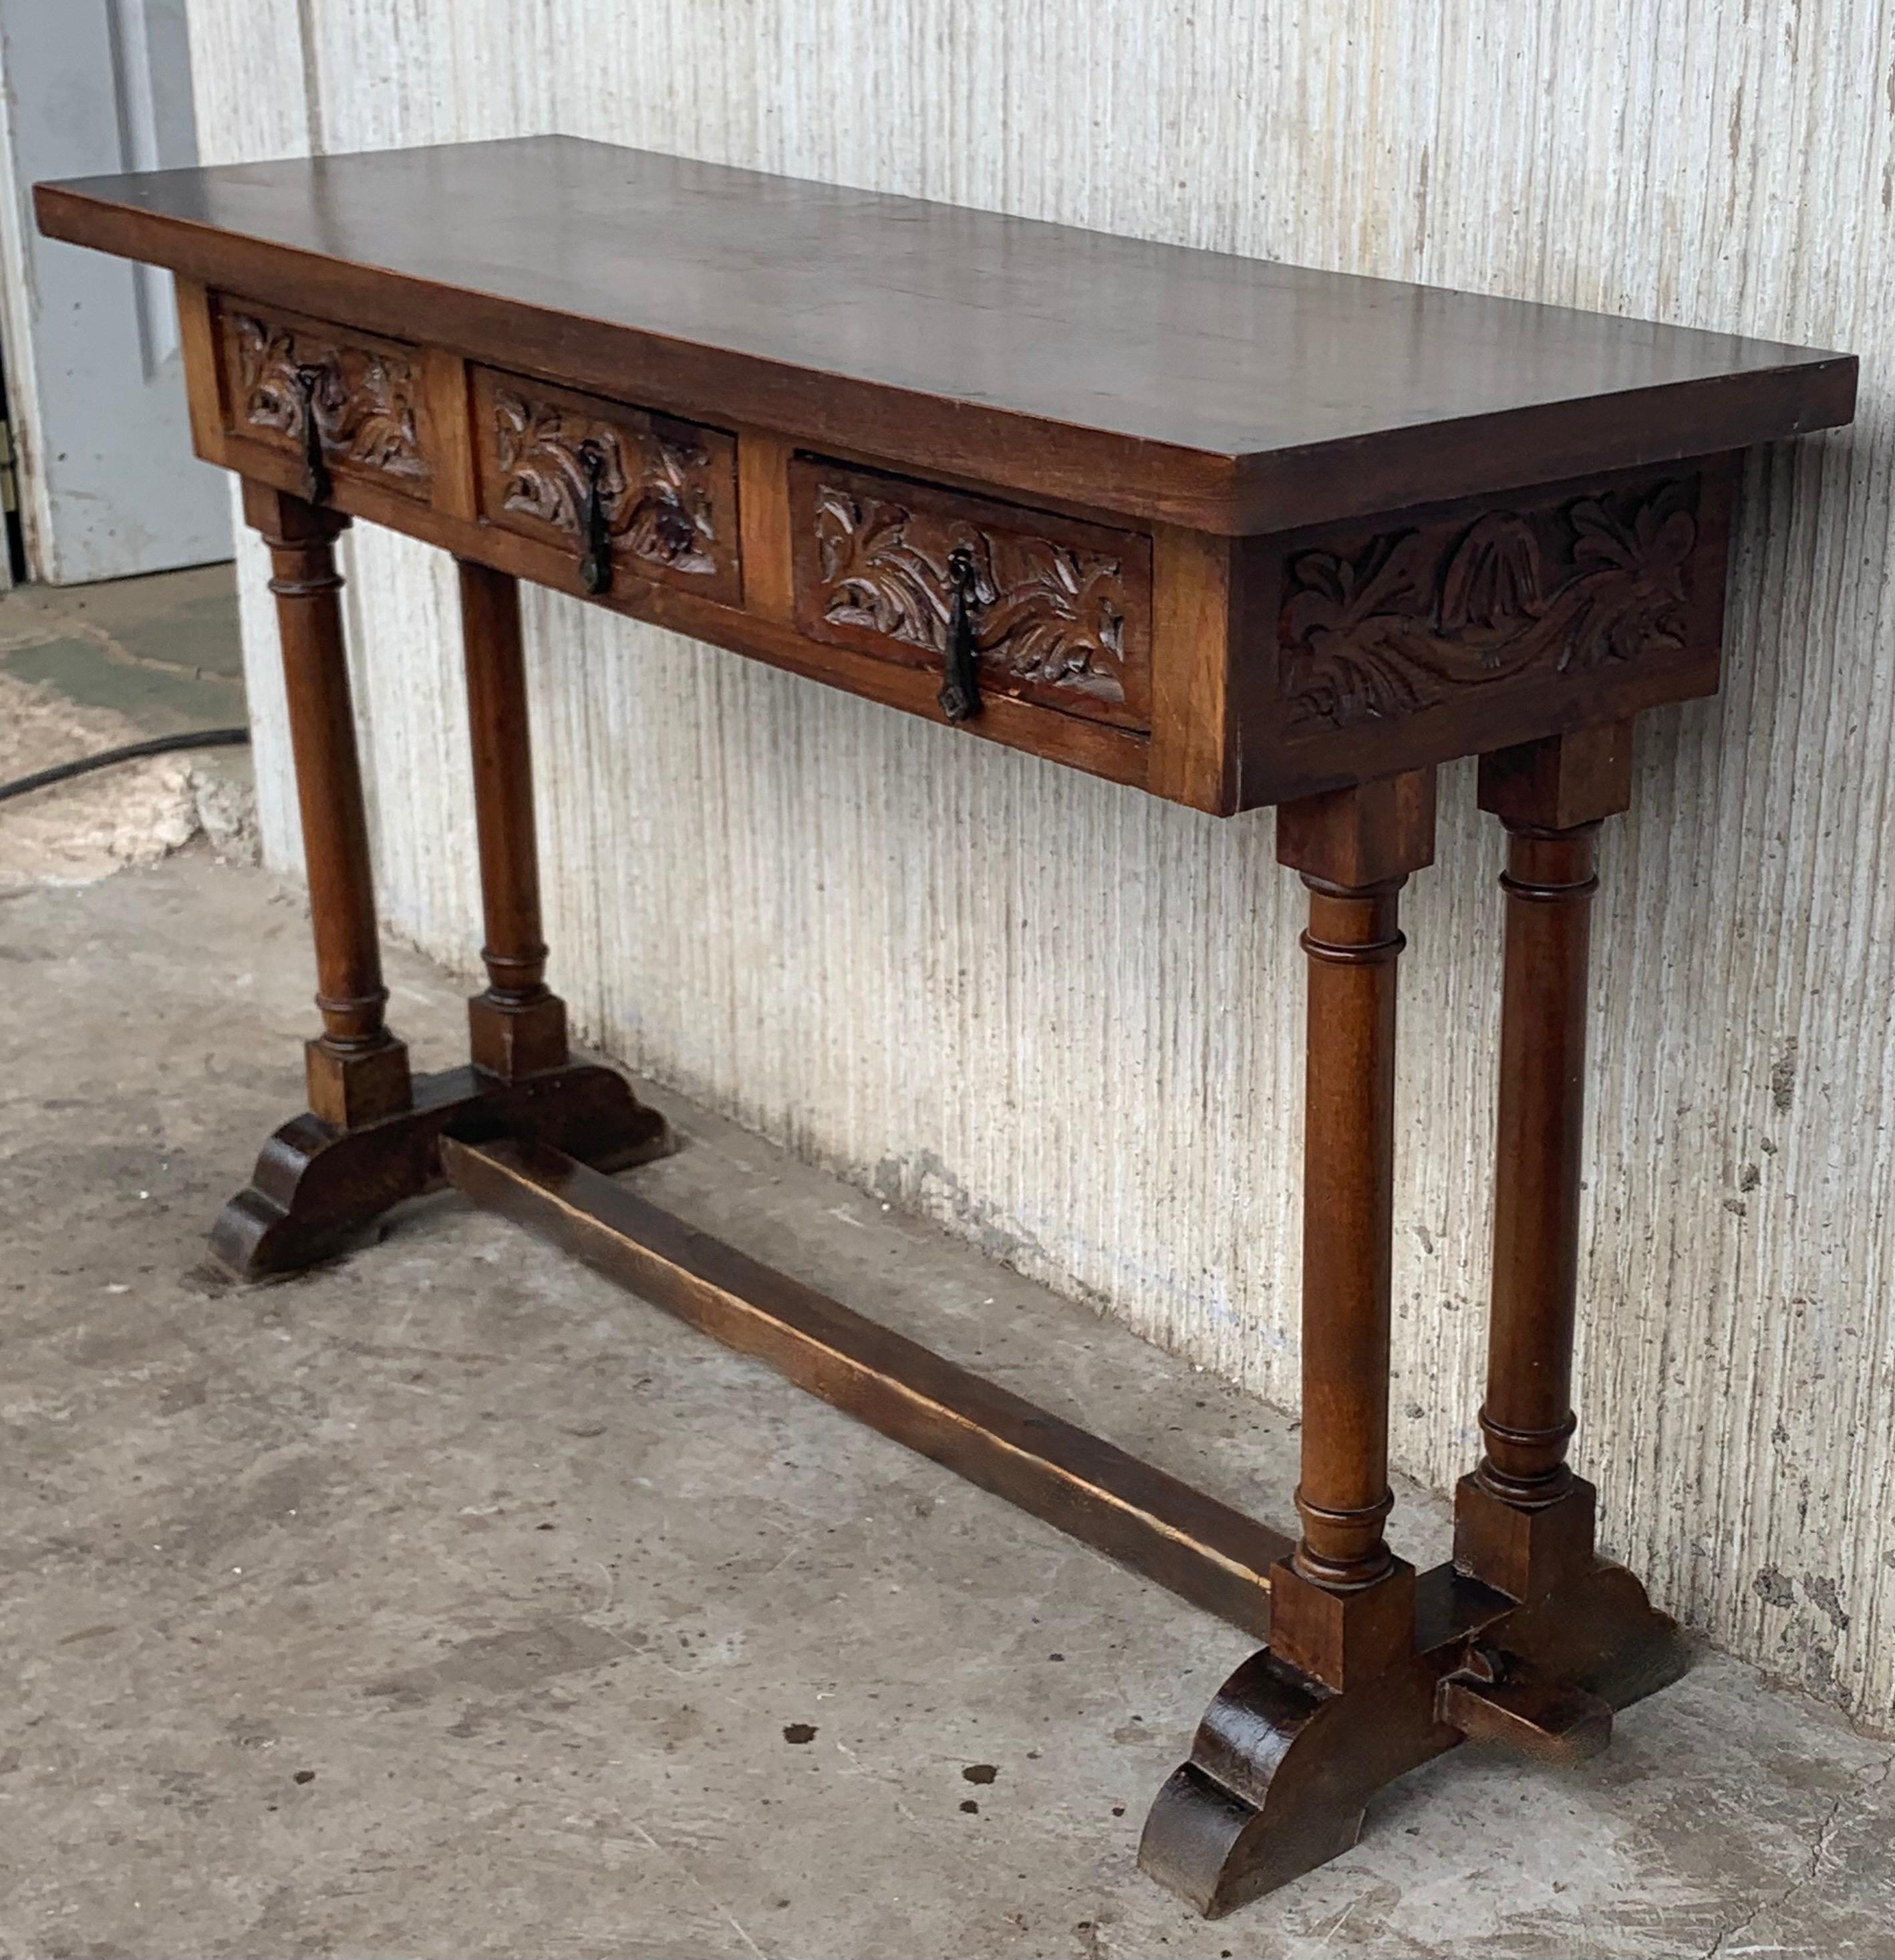 Spanish Baroque Console Table in Walnut with Three Carved Drawers and Stretcher